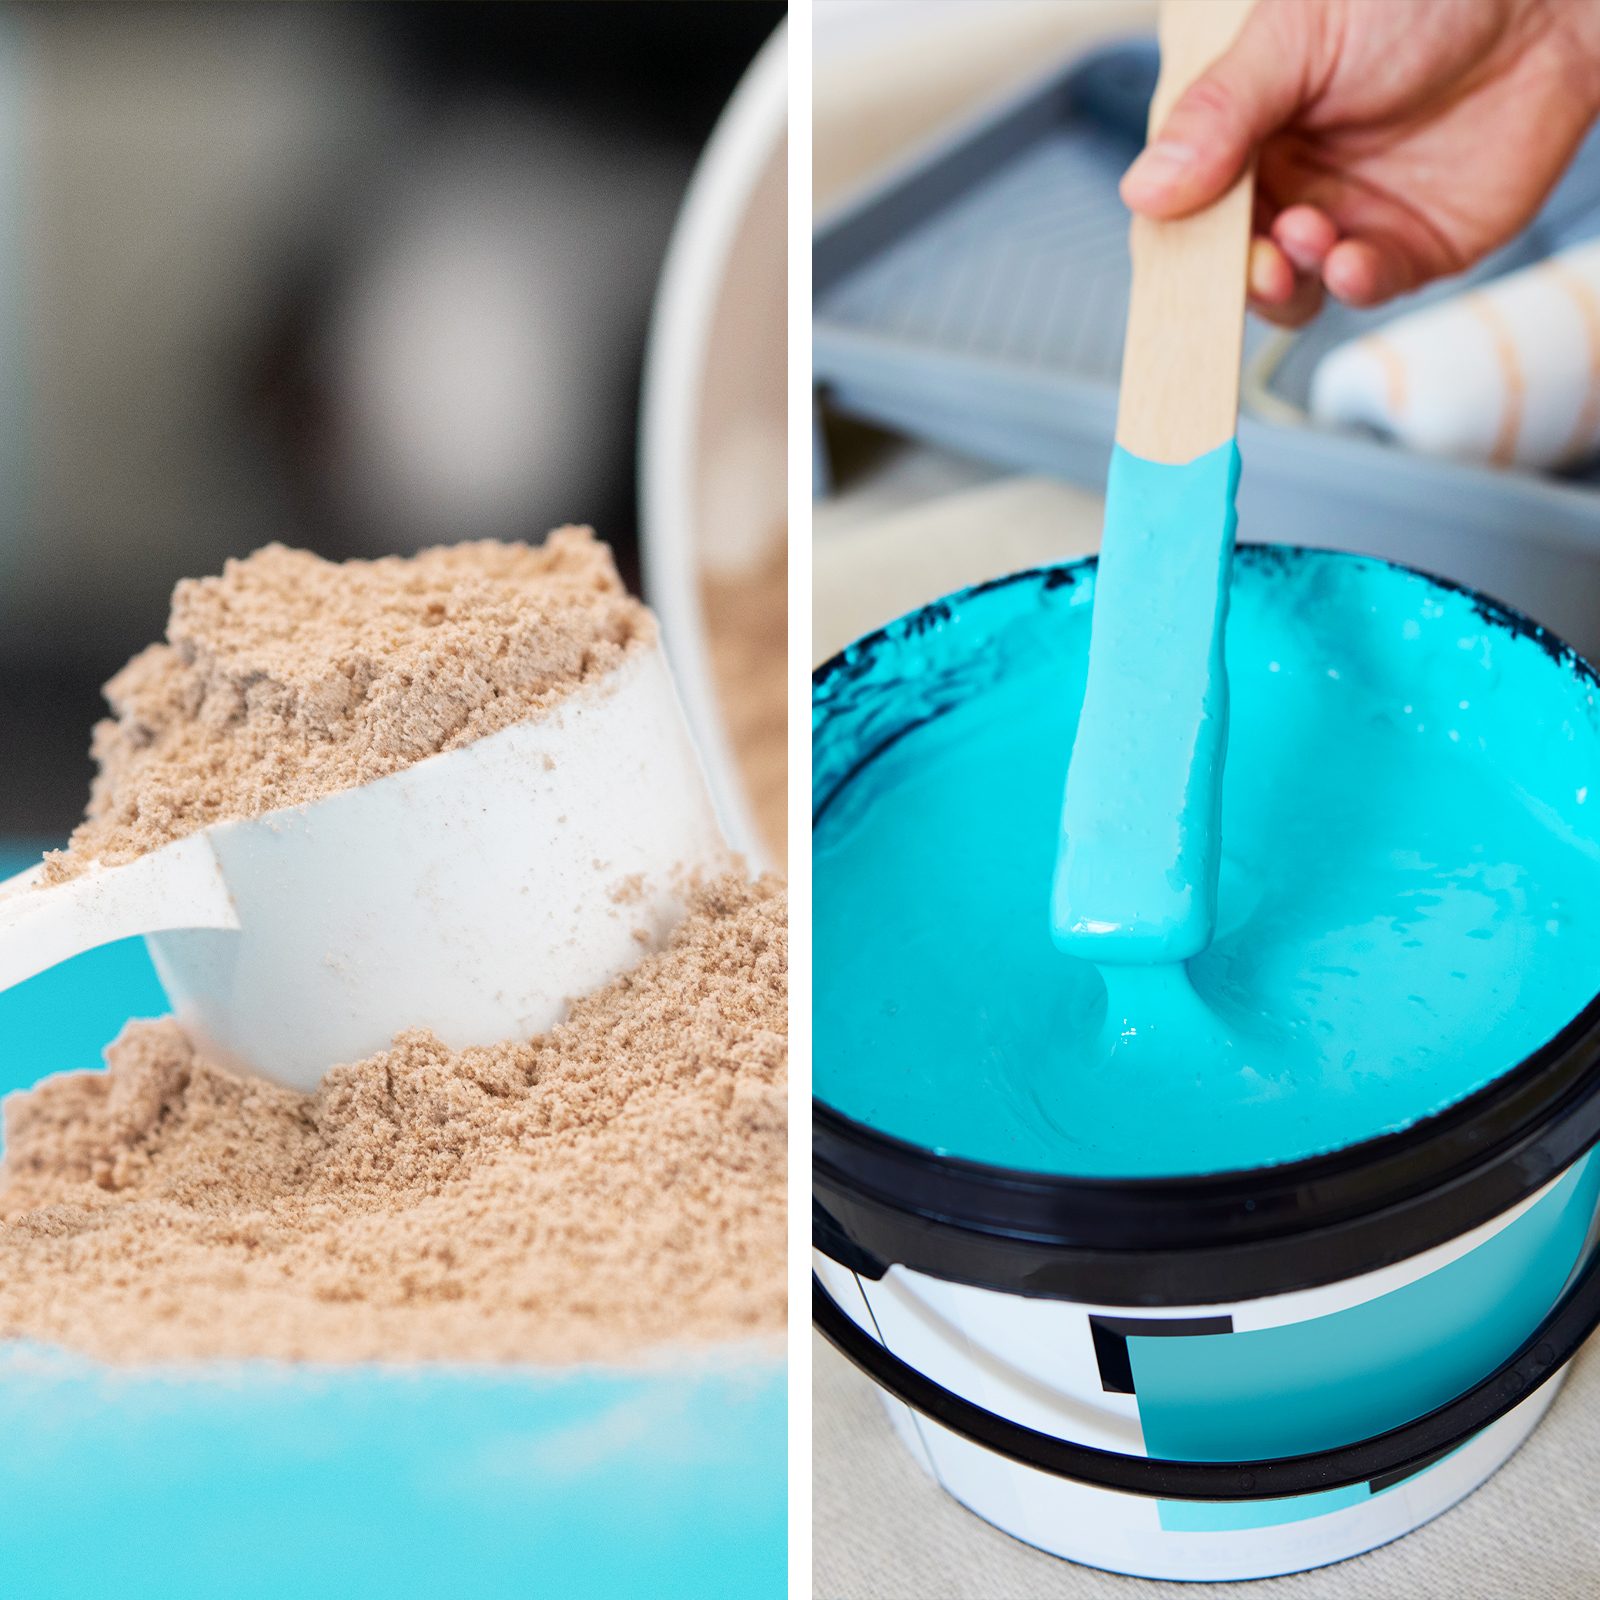 When Should You Add Sand To Paint?